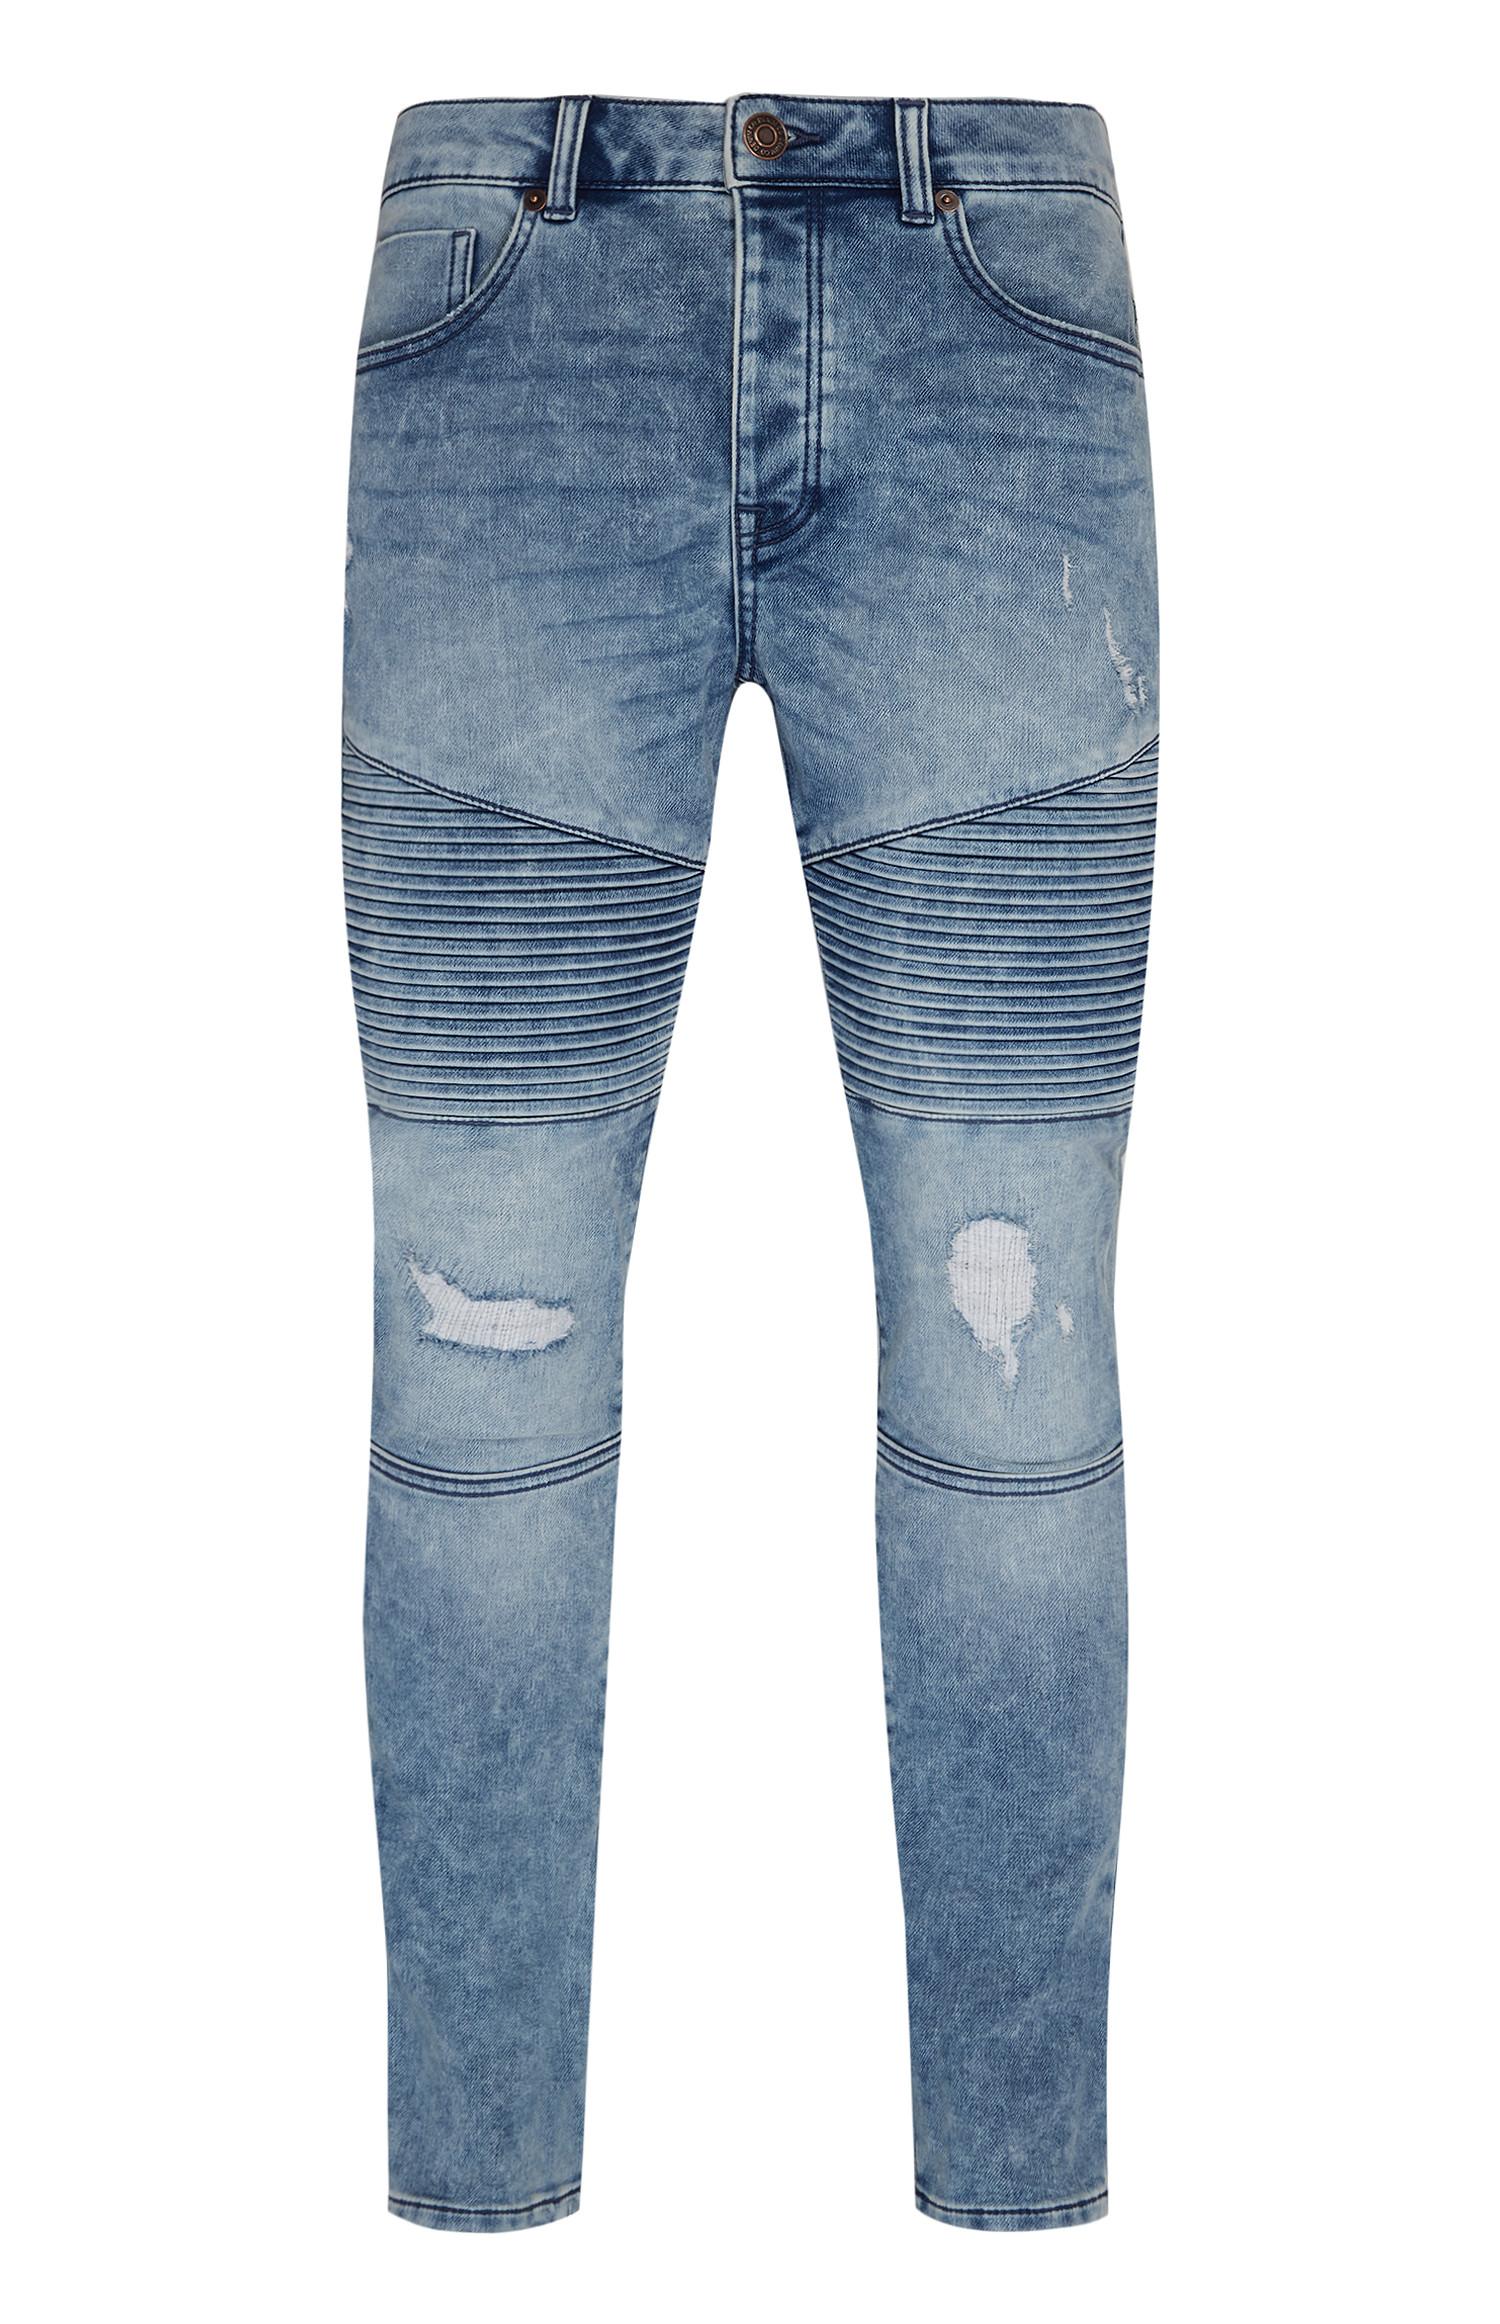 mens ripped jeans primark